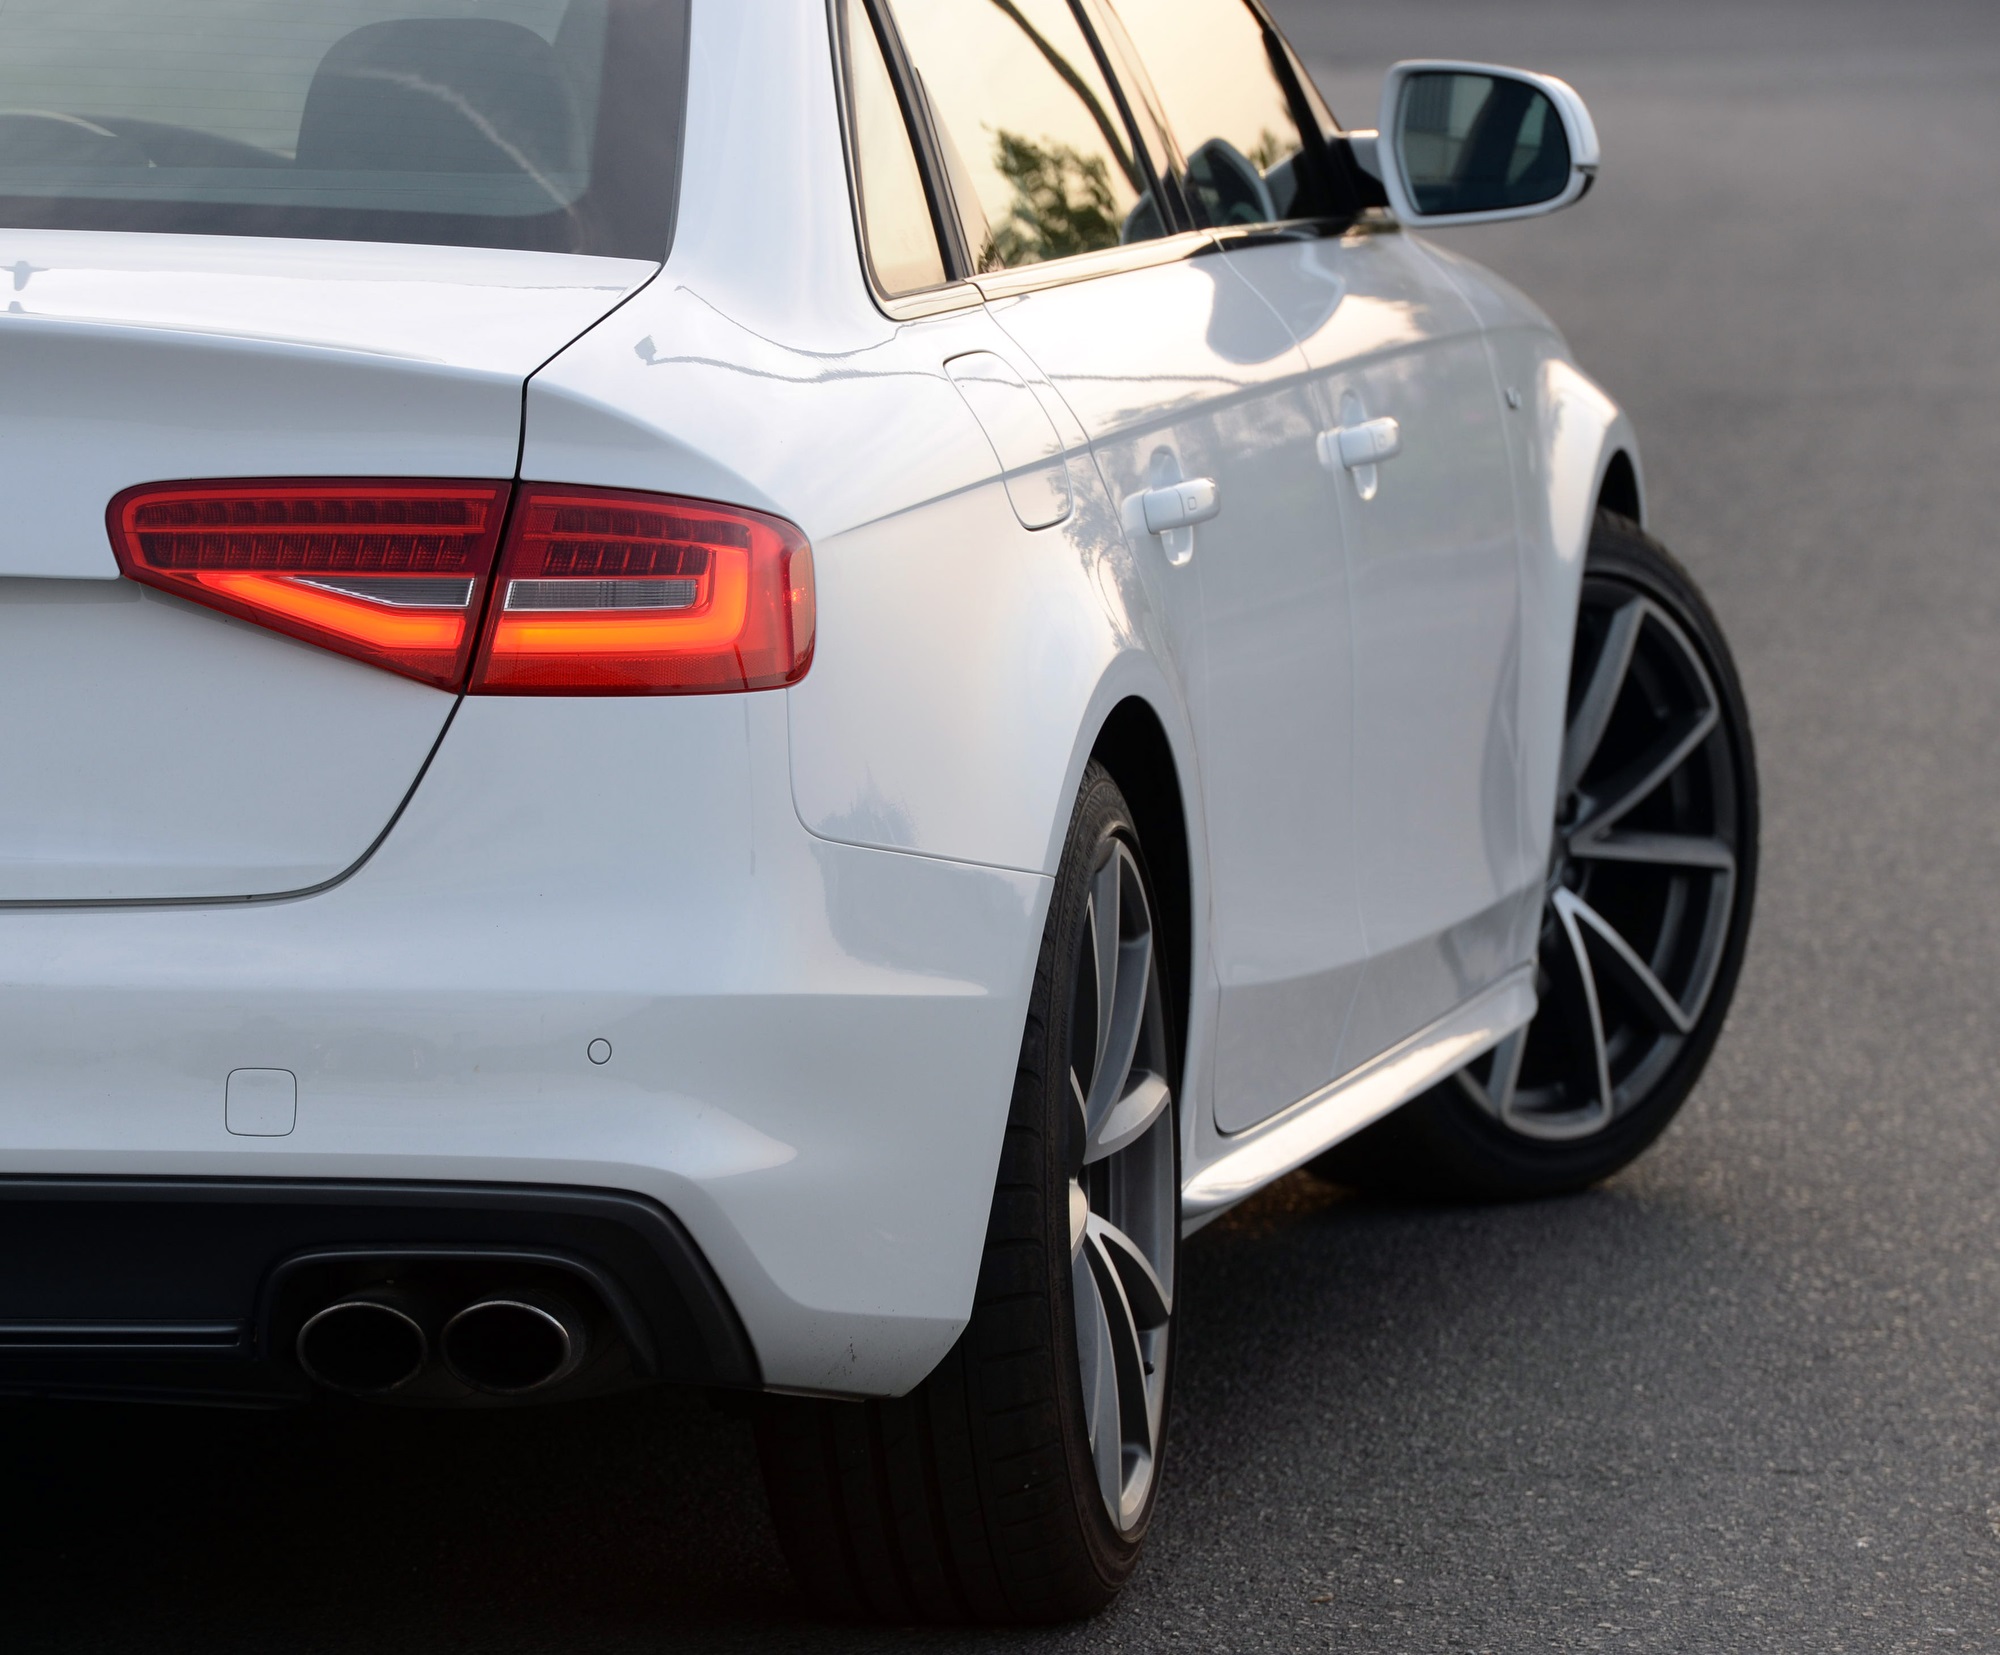 An Audi S4 is reliable if you pick the right years of the Audi model.